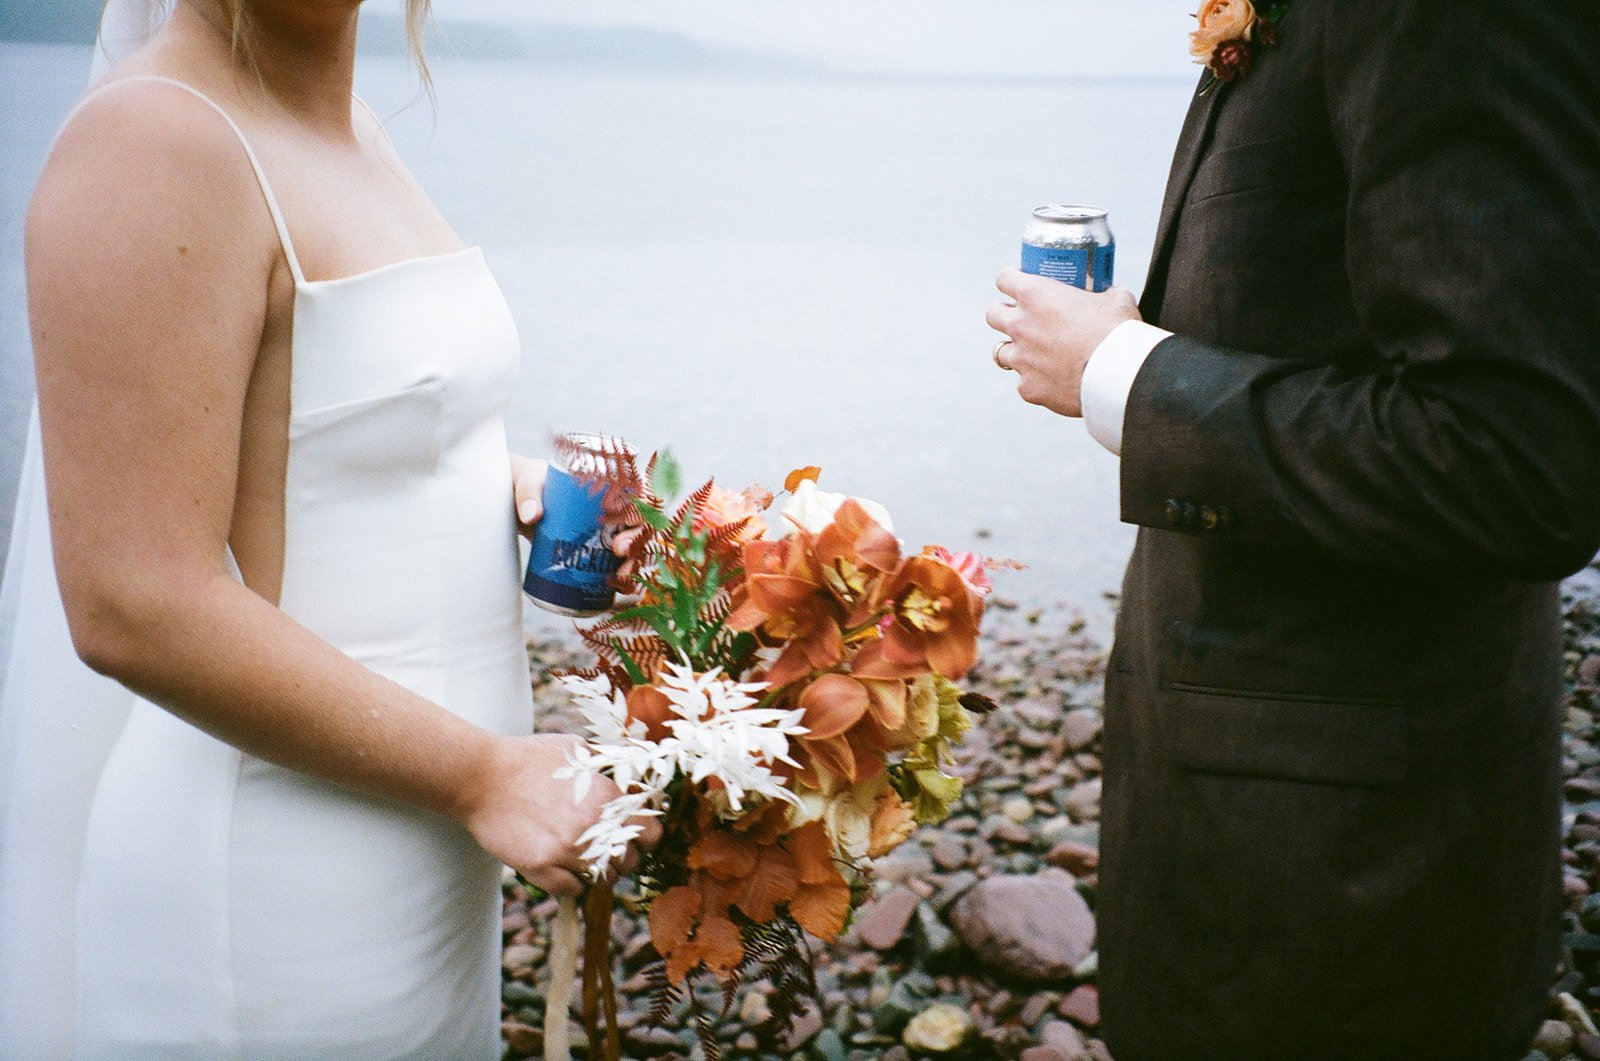 Film photos of bride and groom toasting with beer